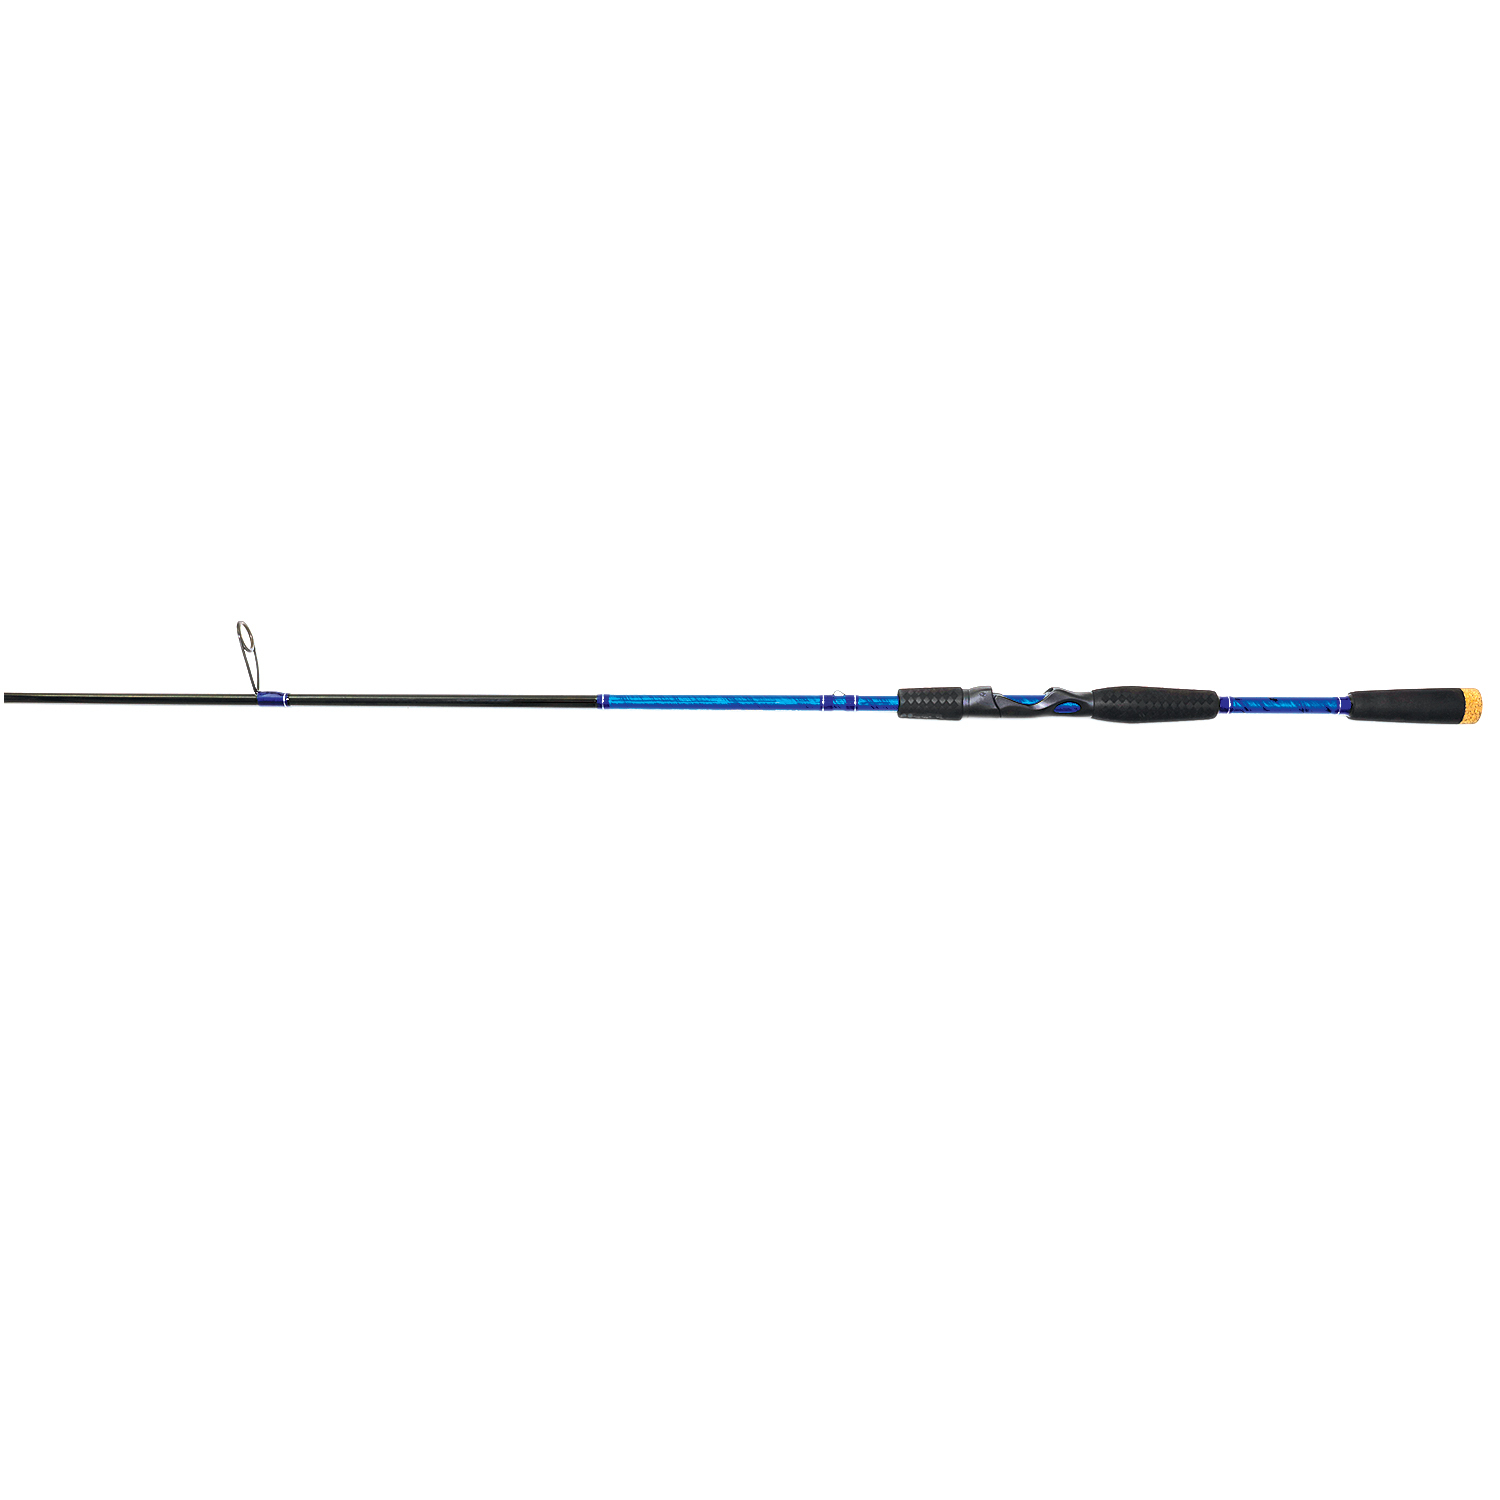 Eagle Claw Inshore Rod, Medium-Heavy Moderate/Fast, 1 Piece, 3/8-1-1/4oz  Lure Weight 10-20Llbs Line Weight ECIS70MHMF1 , $16.00 Off with Free S&H —  CampSaver